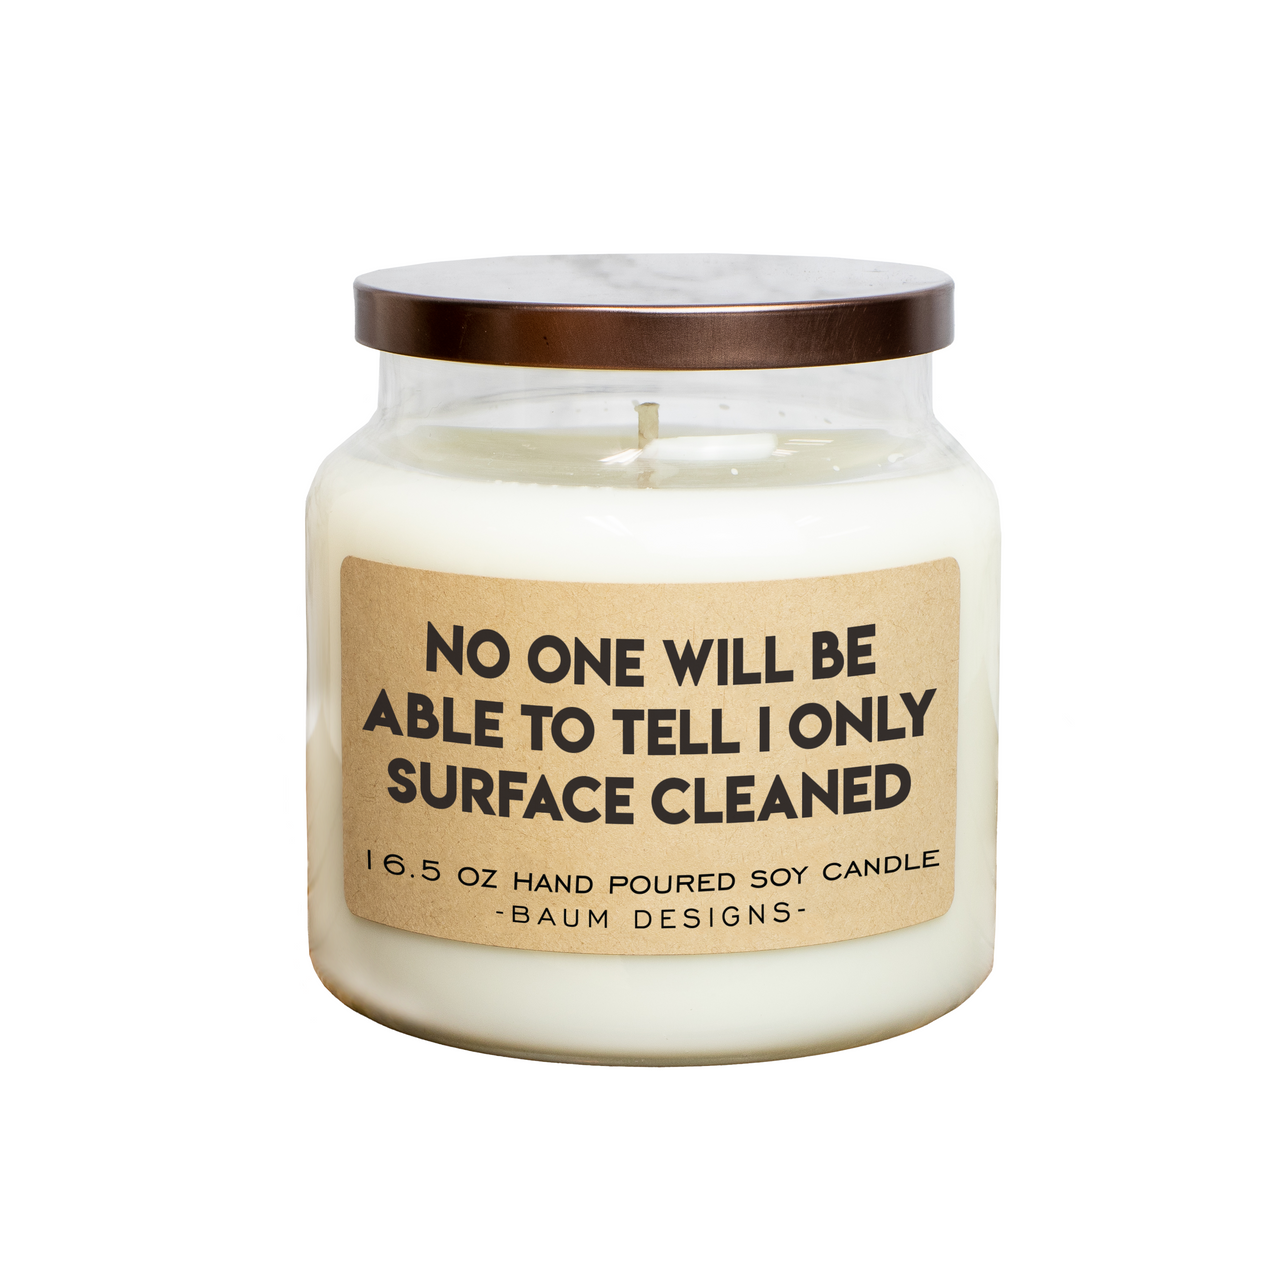 No One Will Be Able To Tell I Only Surface Cleaned Soy Candle